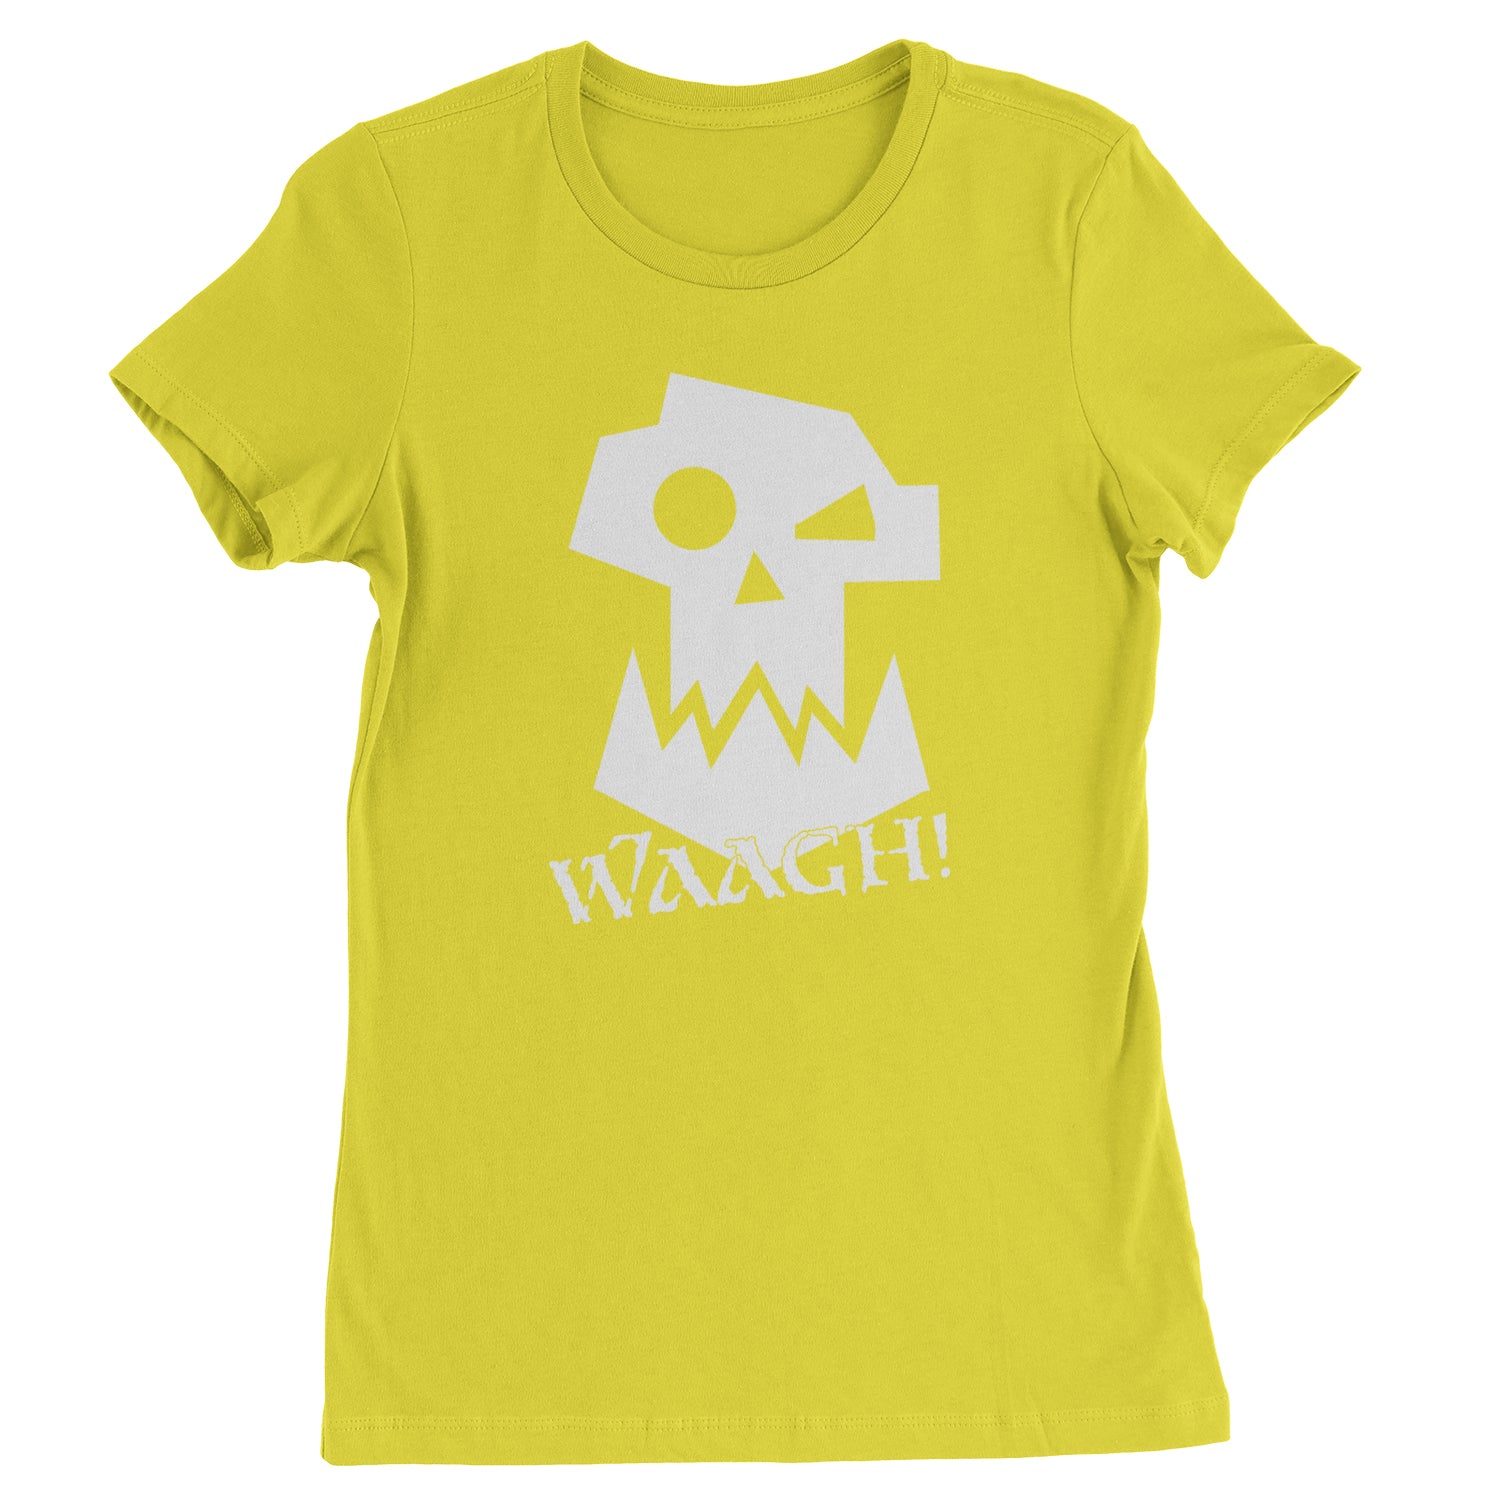 Ork Miniature Tabletop Wargaming Waagh Womens T-shirt #expressiontees by Expression Tees